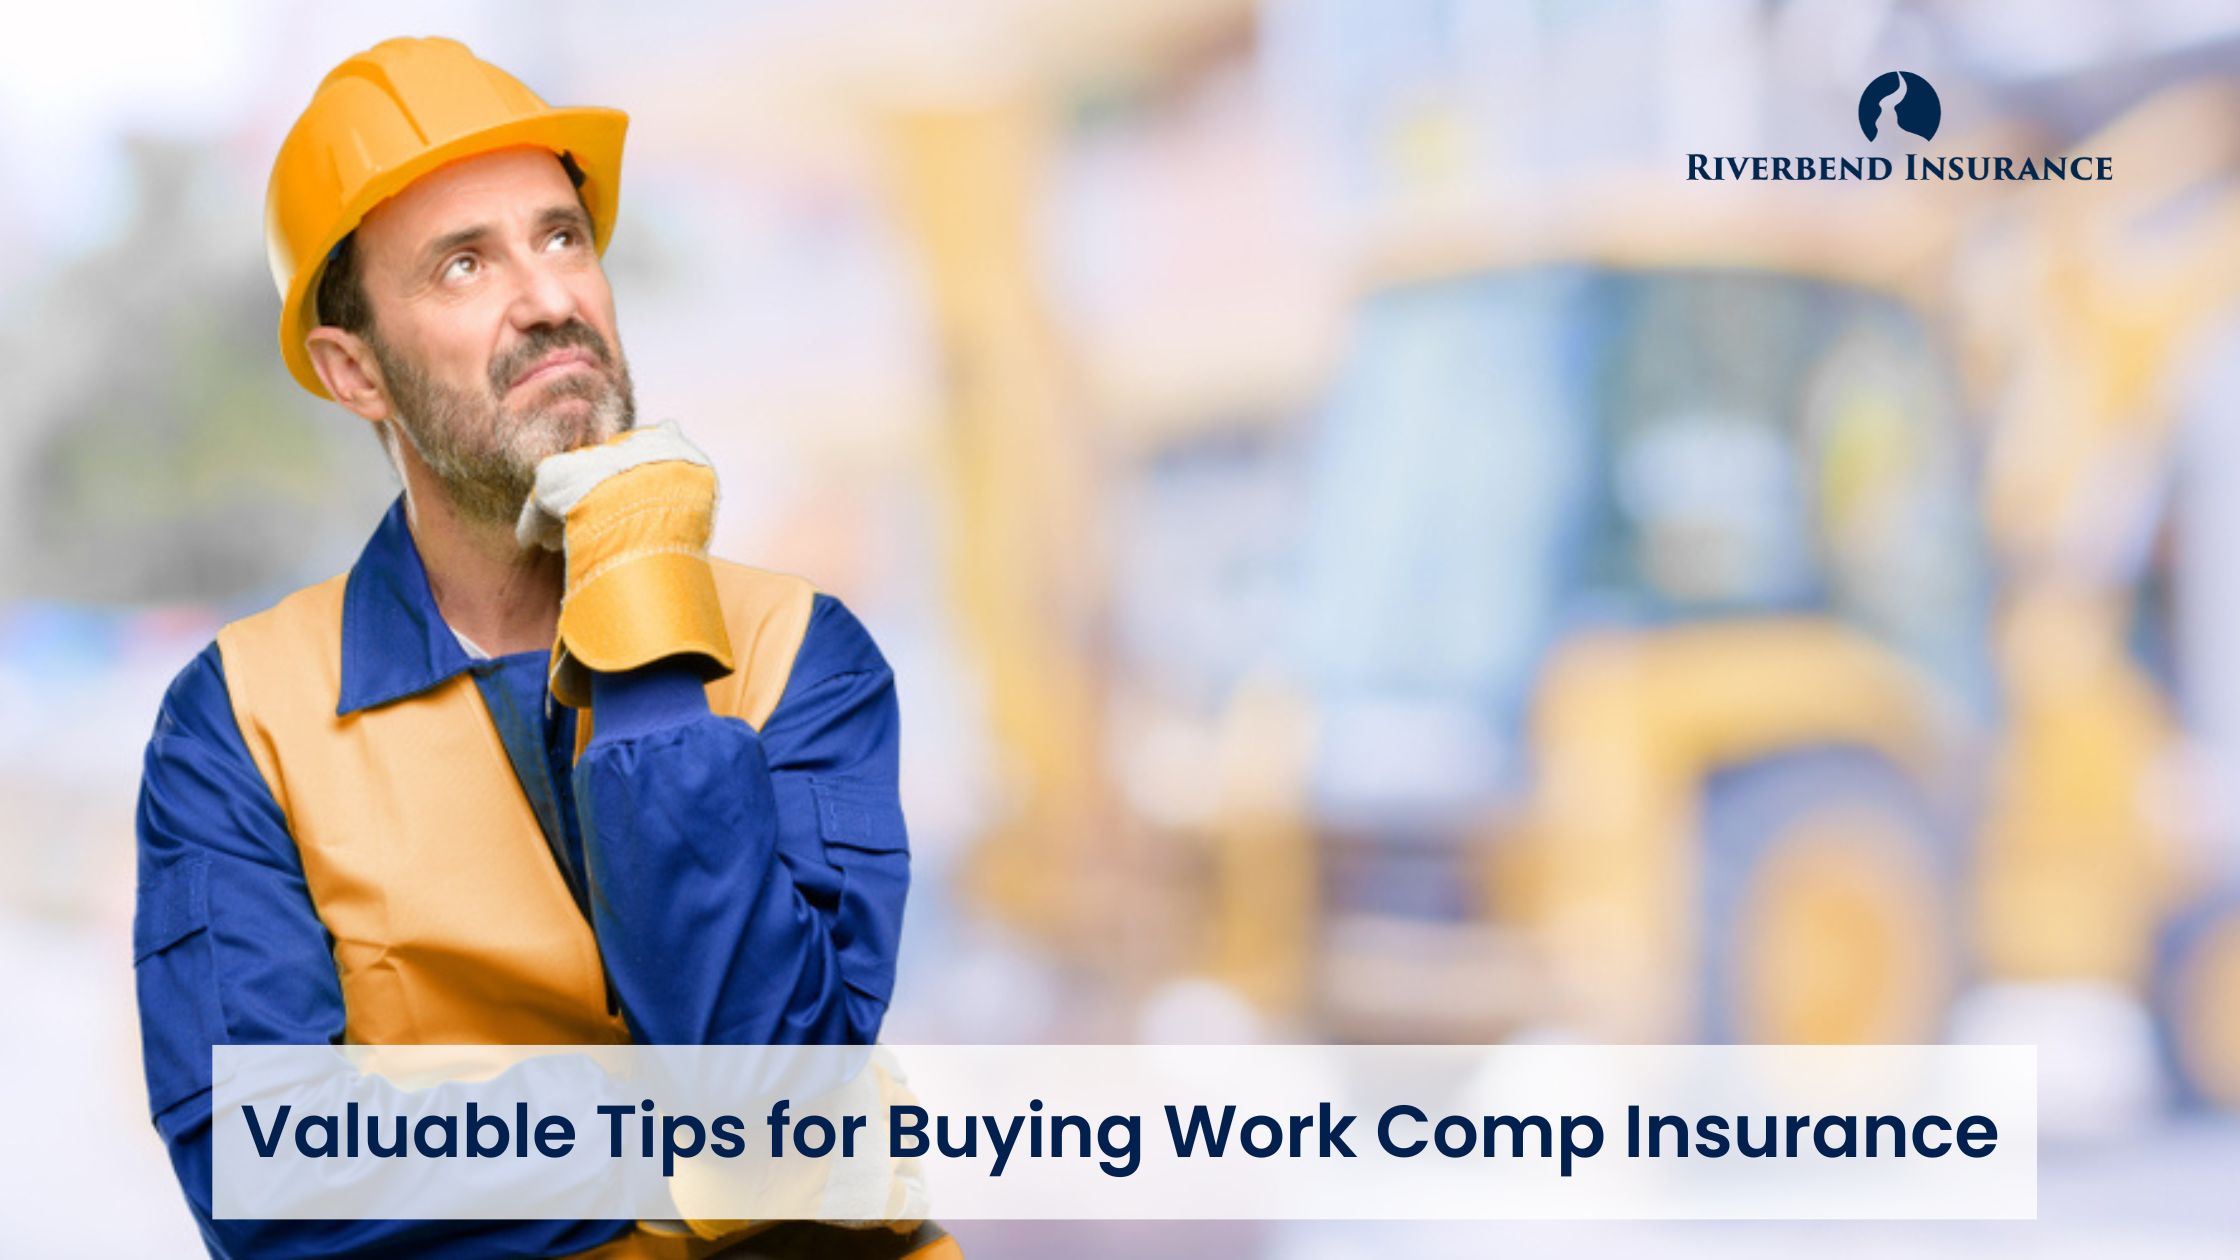 8 Valuable Tips for Buying Workers' Comp Insurance